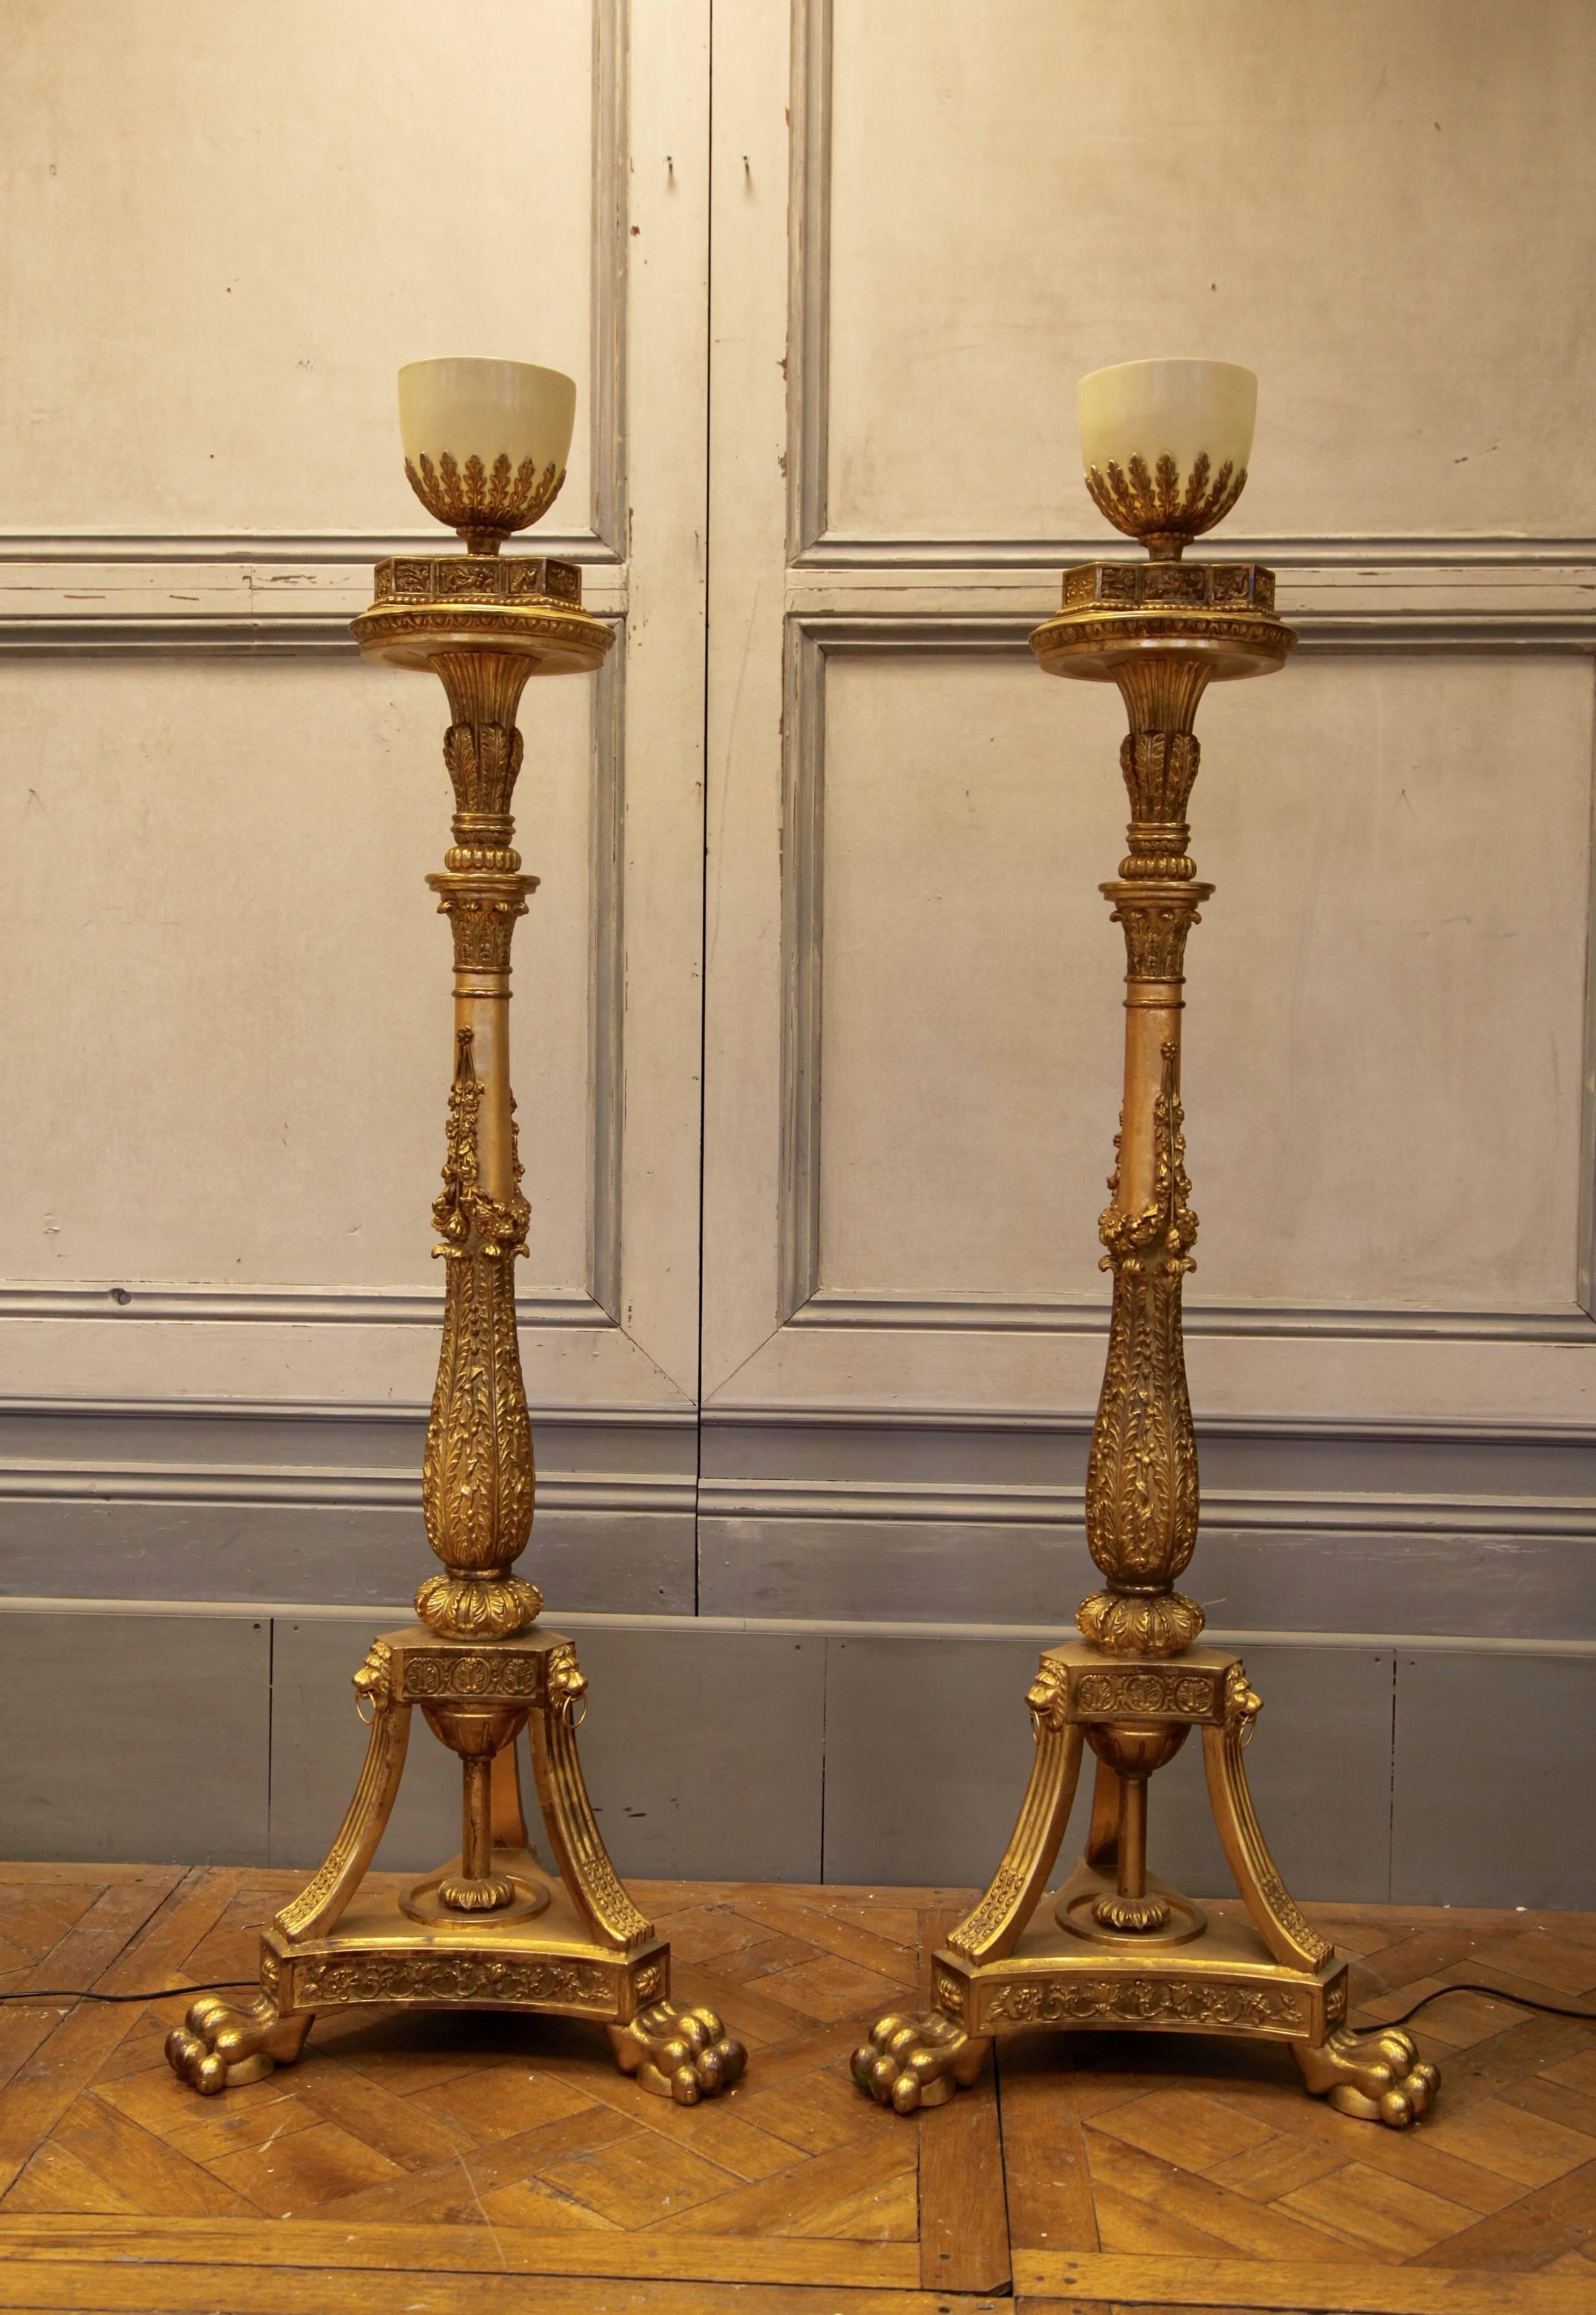 Impressive Louis XVI style torchere bases with up lighters. Beautifully hand-carved and gilded by hand using traditional methods in an antique finish.